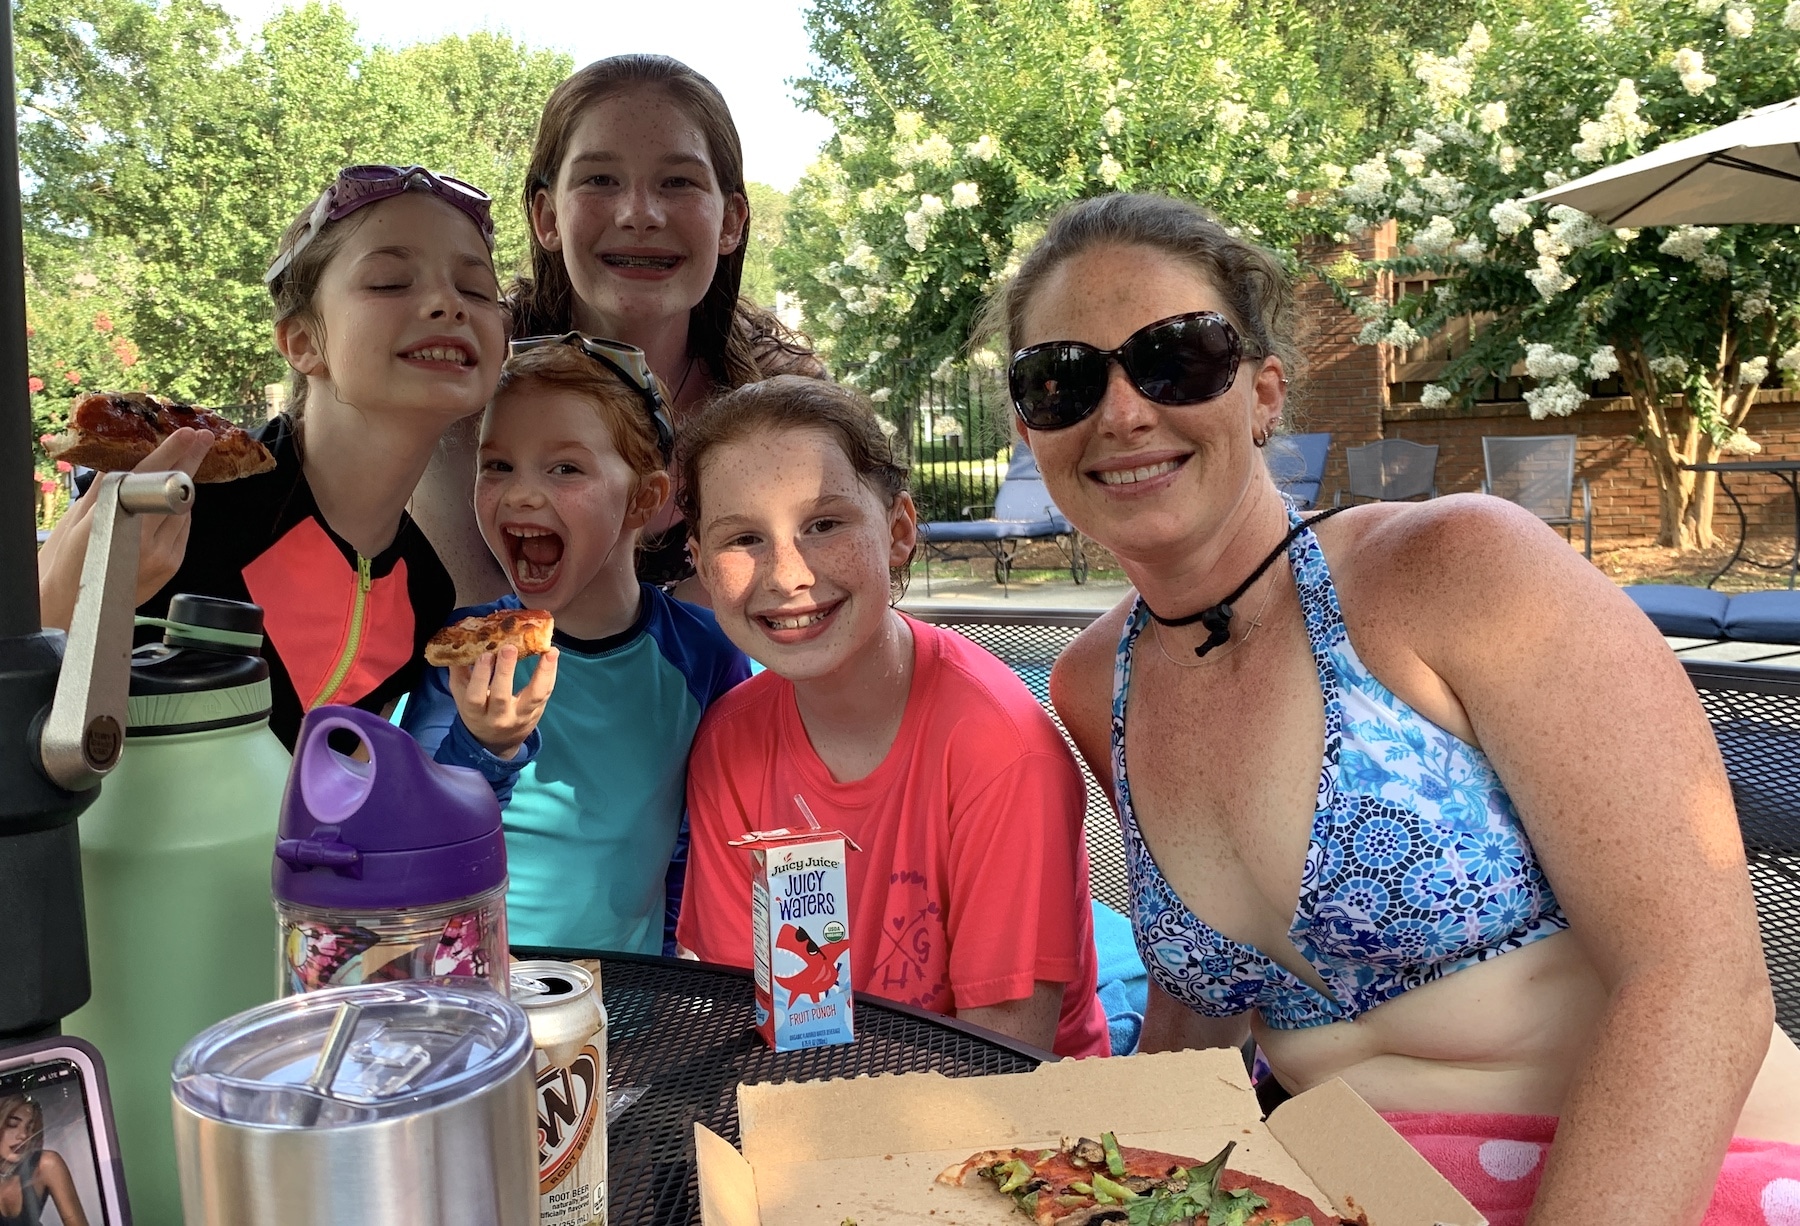 pizza and pool family fun